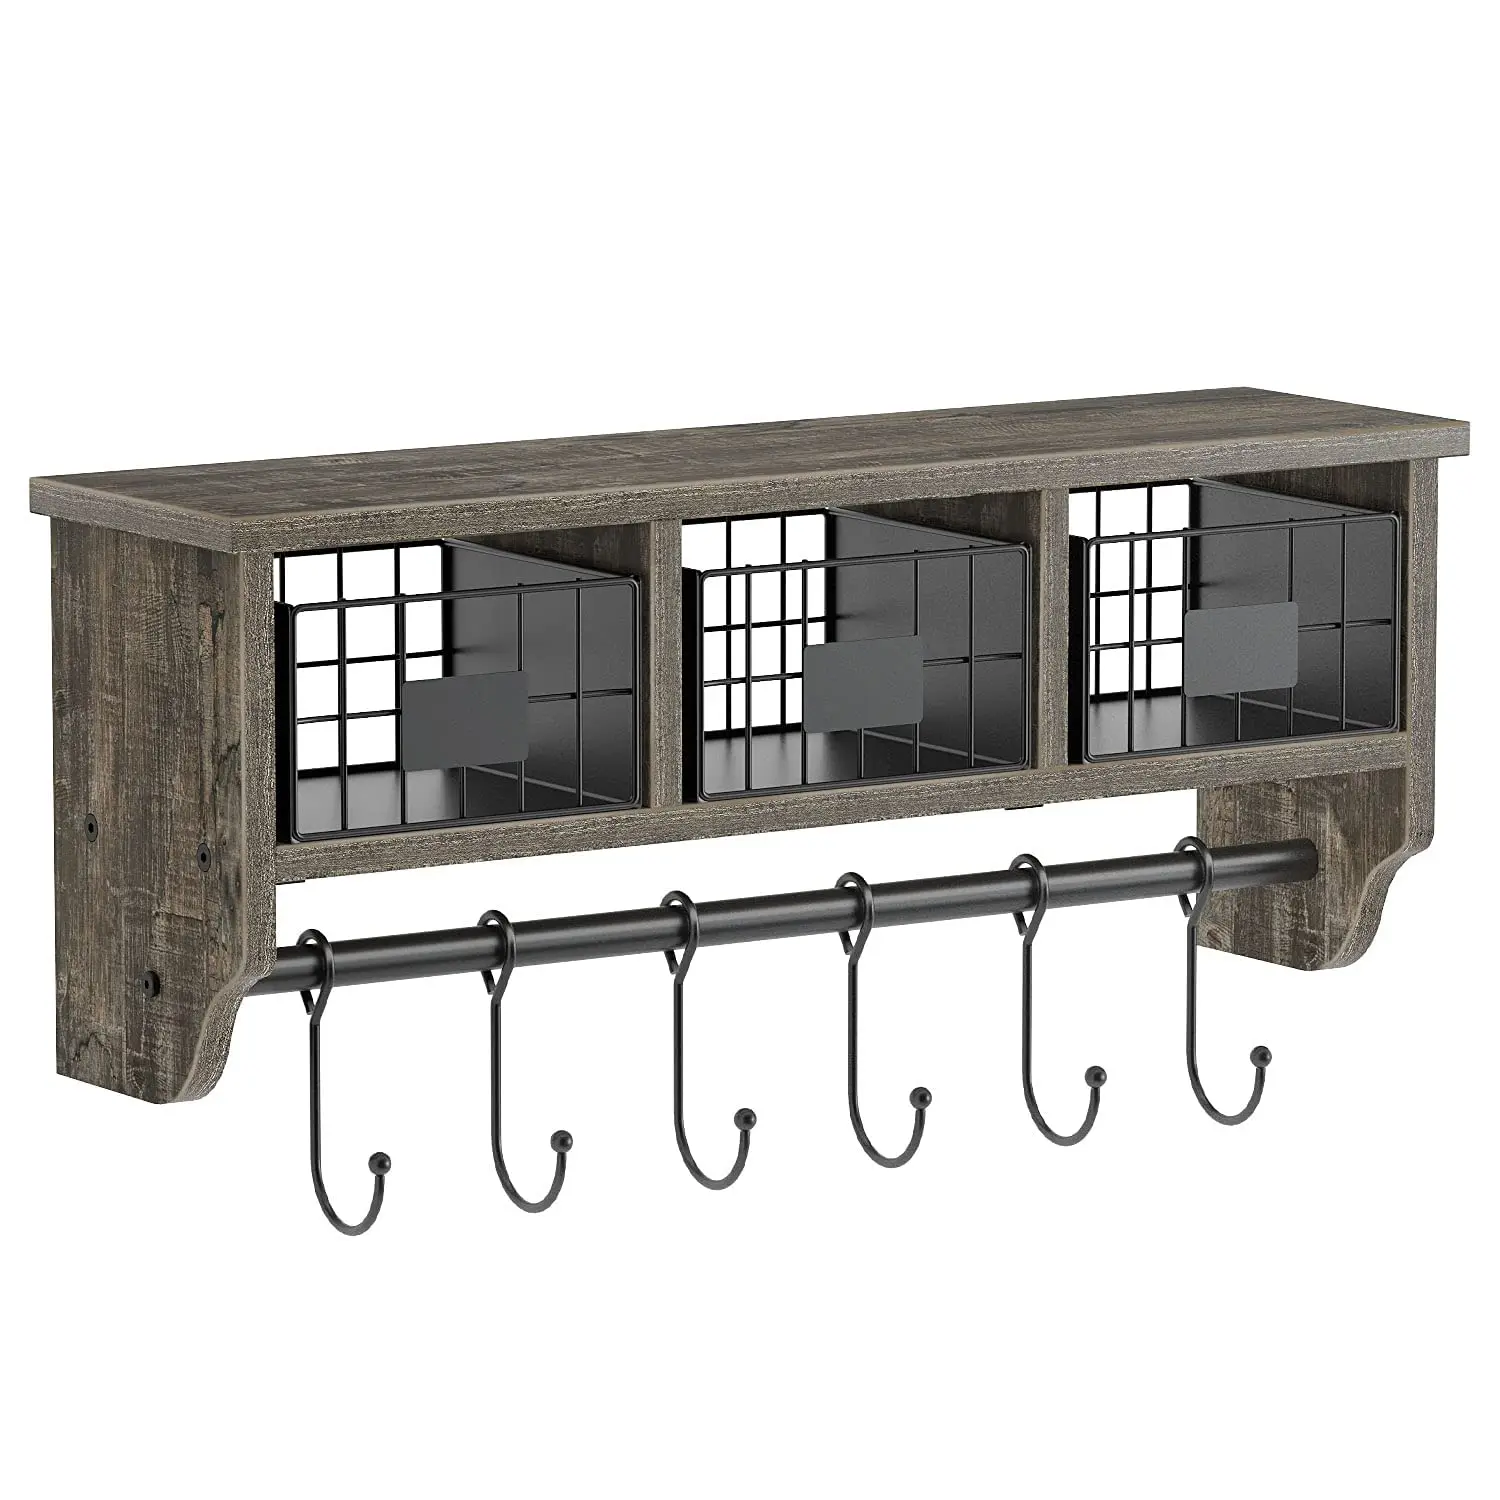 

Wall Mounted Shelf with Coat Hooks and Baskets, Solid Wood Entryway Organizer Wall Shelf with Hooks Rustic Blackwash 24" Wide